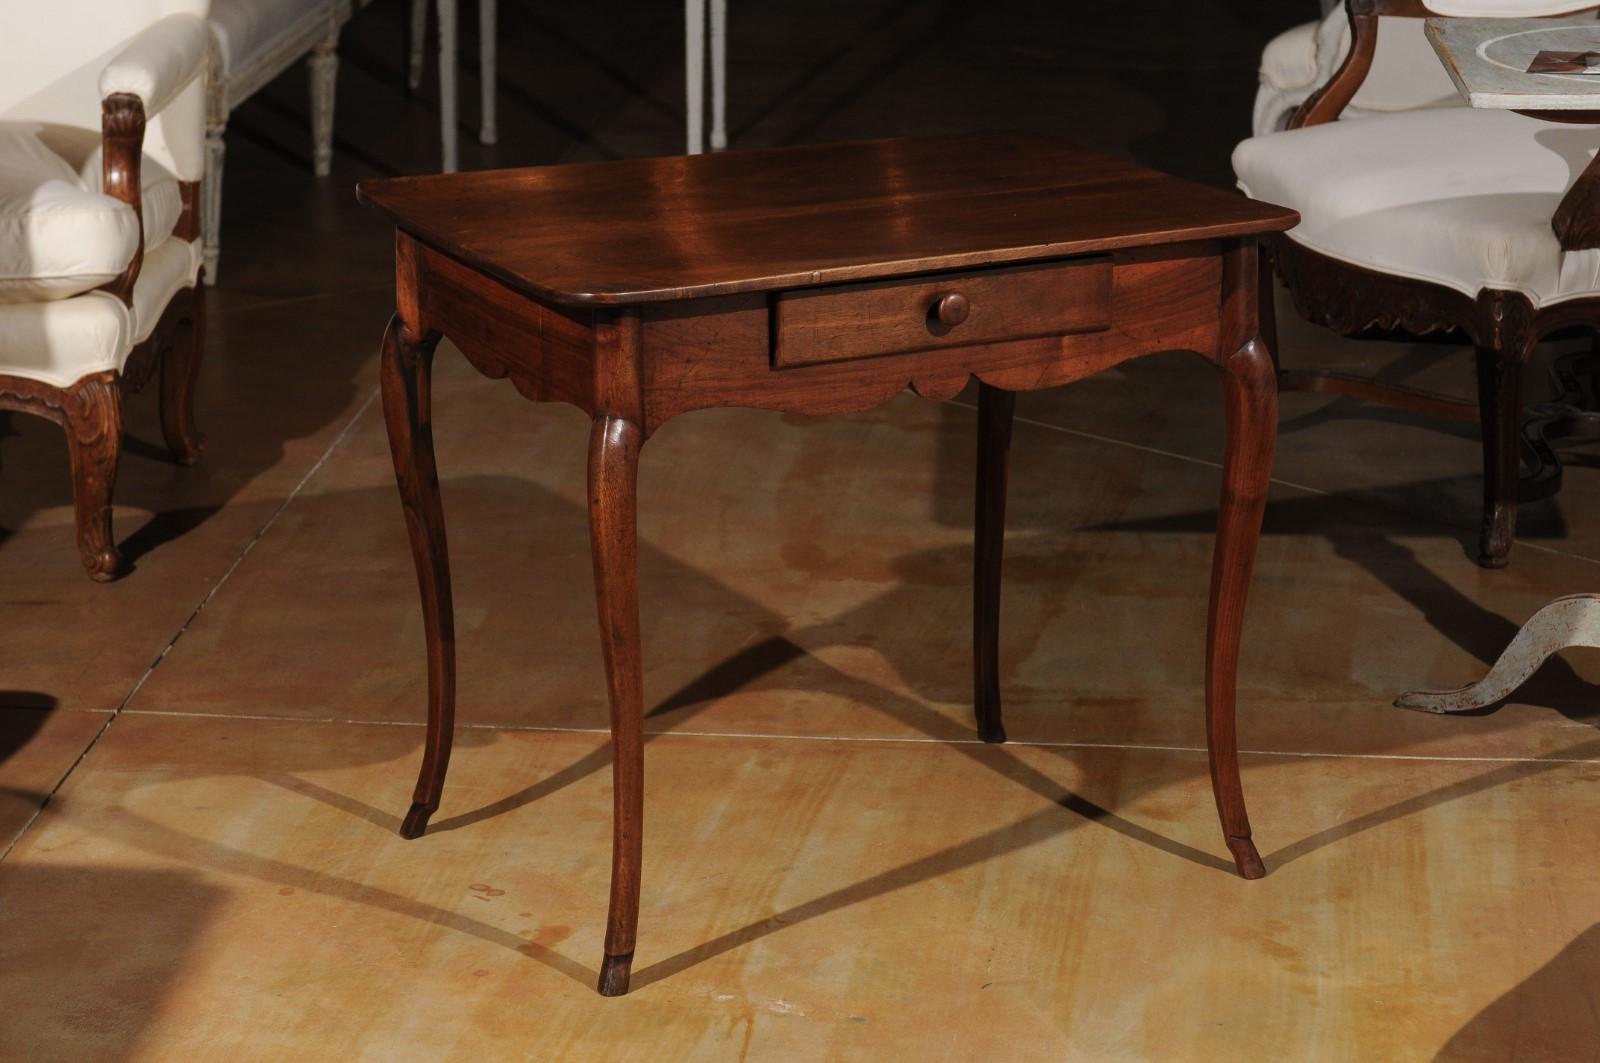 A French Louis XV period walnut table from the mid-18th century with acacia cabriole legs, scalloped apron and single drawer. Born in the Rhône Valley during the reign of King Louis XV 